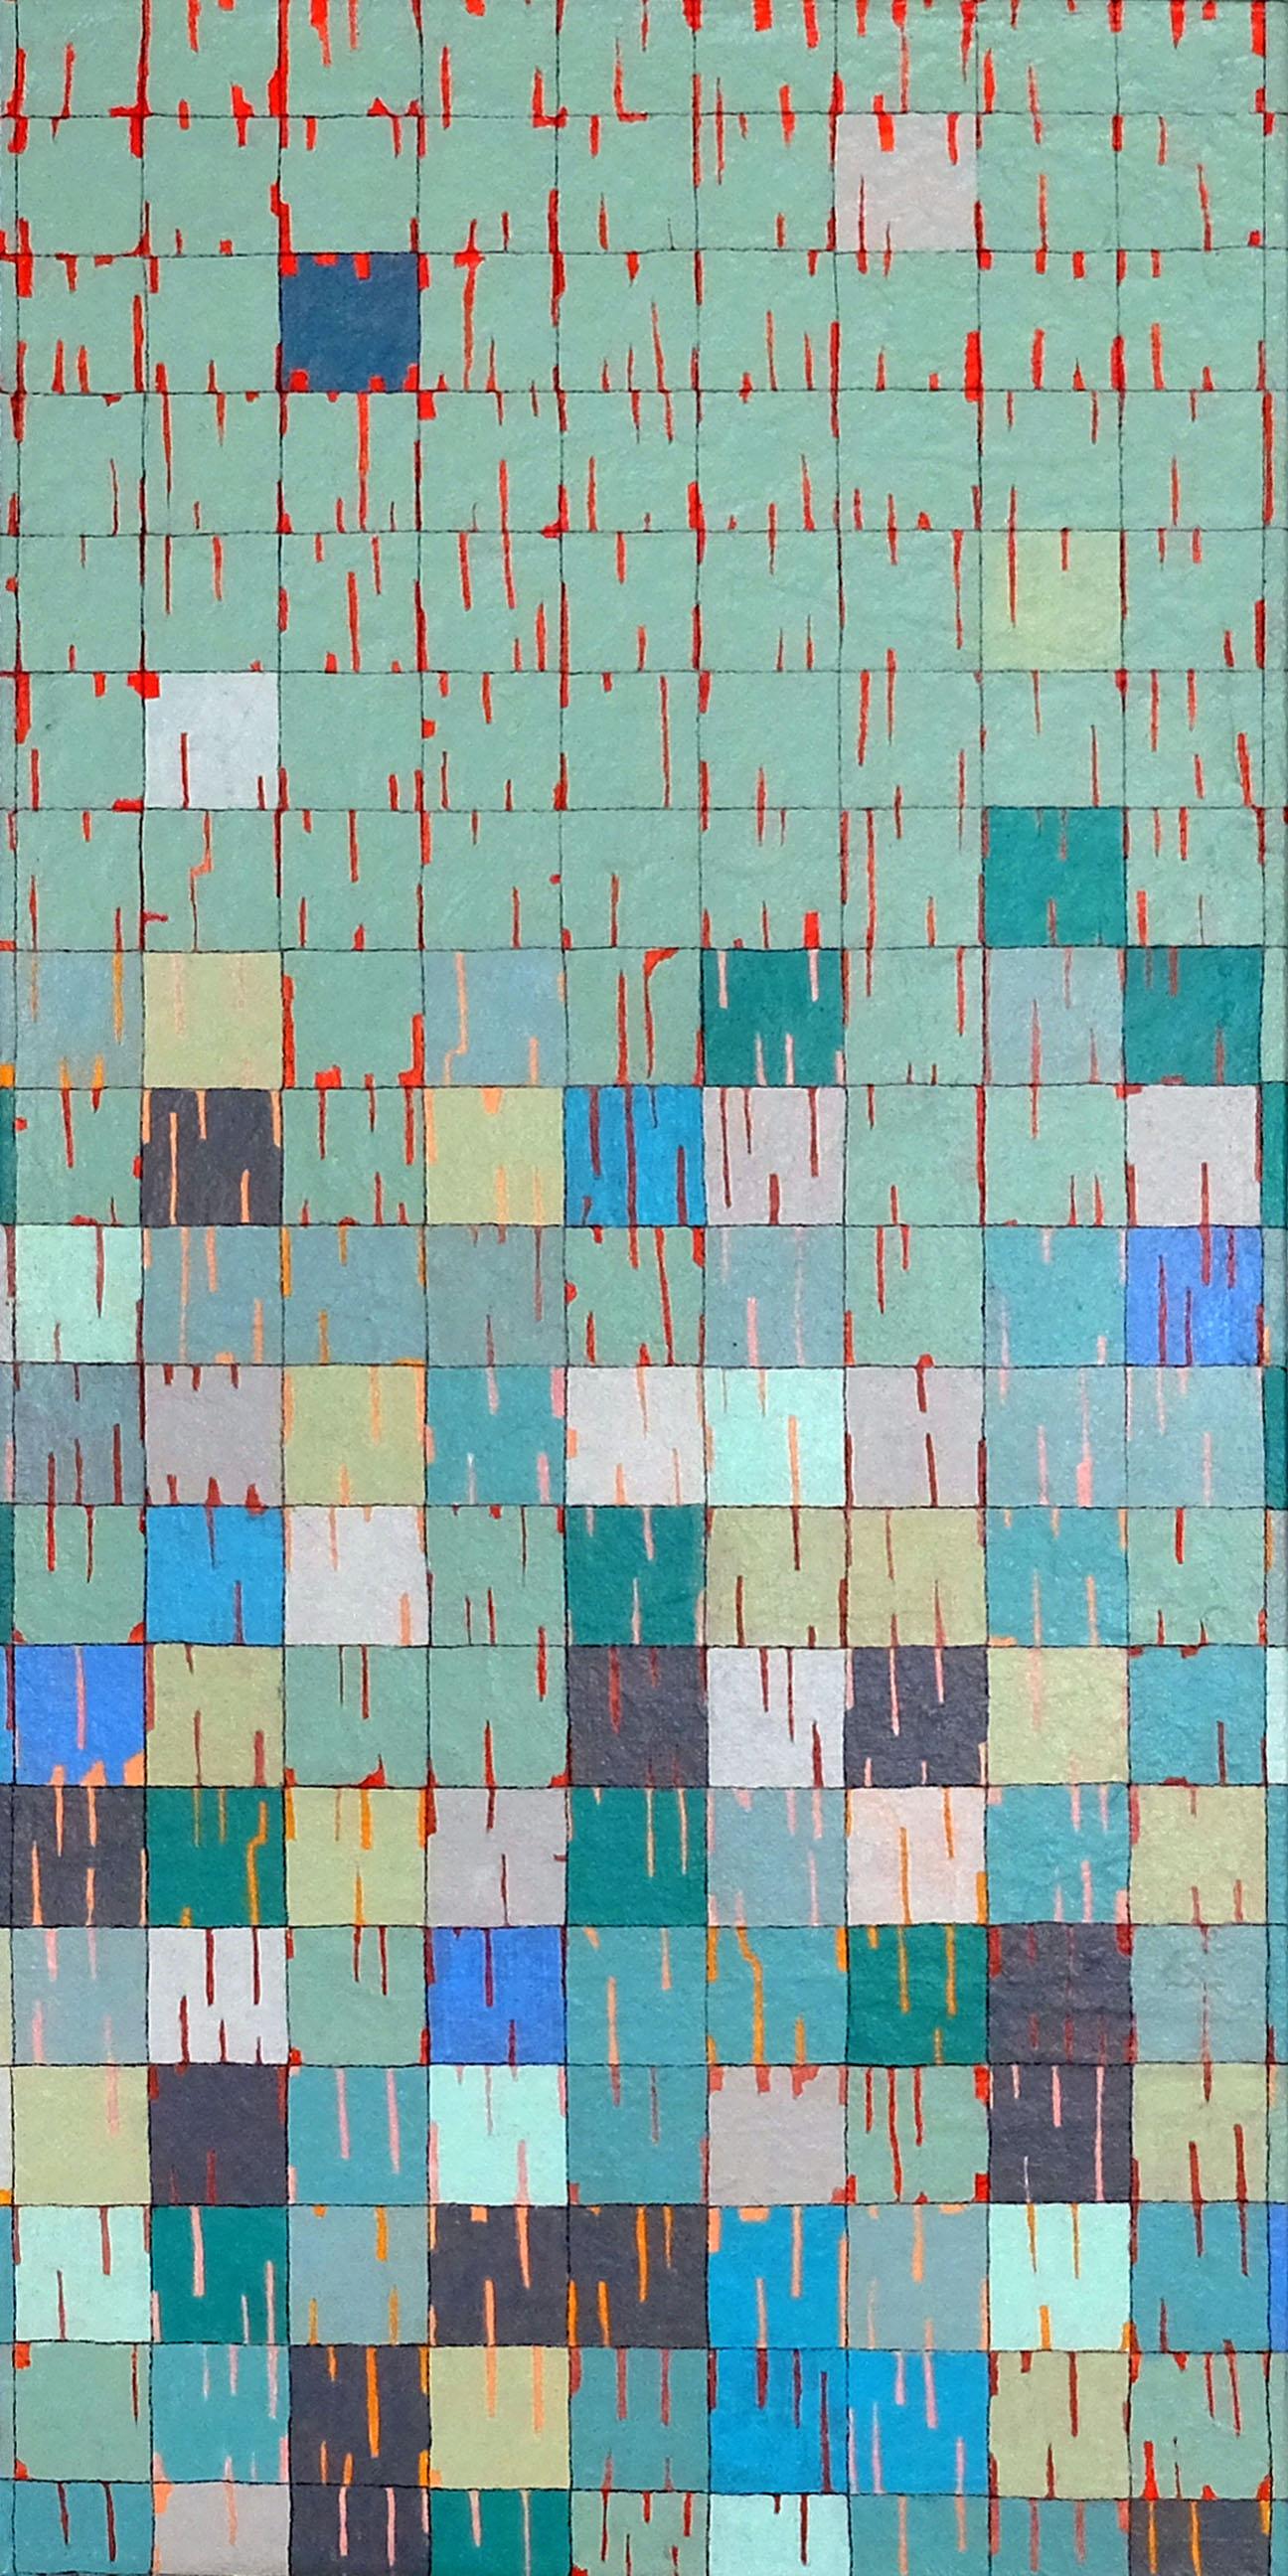 Gridscape: Upper Compartment on the Left, Abstract Painting - Mixed Media Art by Terri Bell